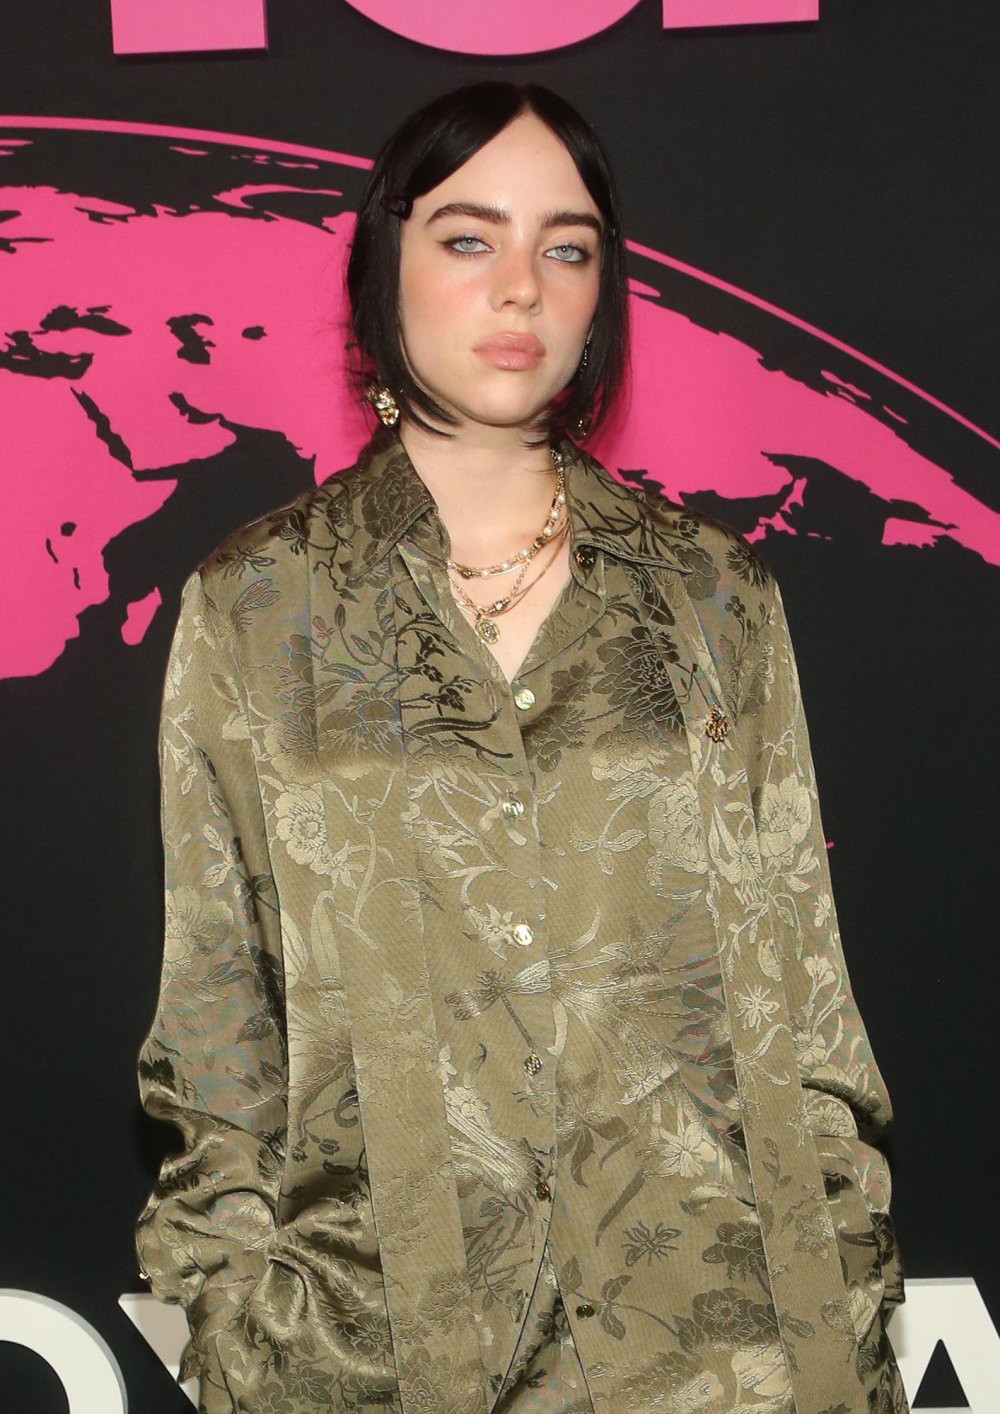 Billie Eilish on How Body Shaming Affects Her Mental Health